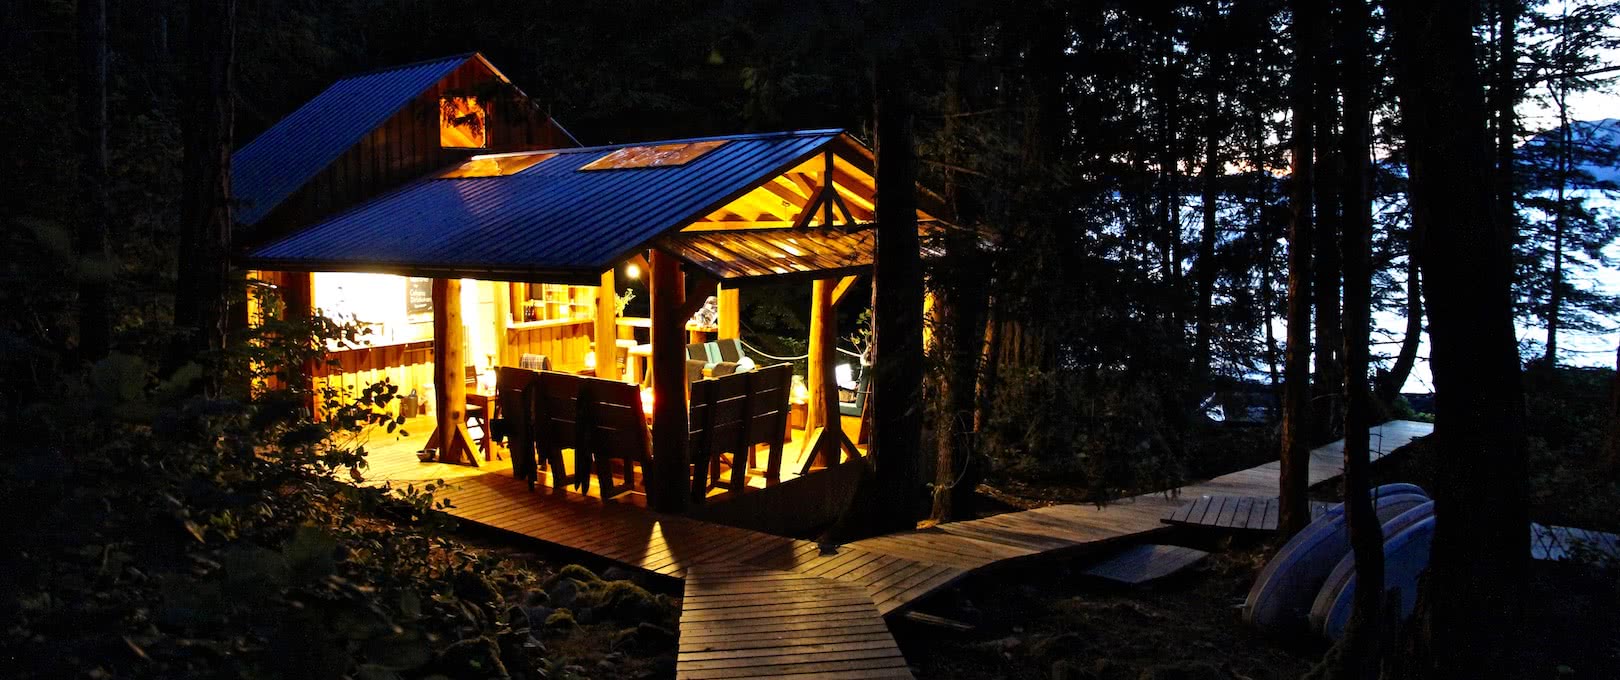 Our British Columbia eco resort lit up in the evening light